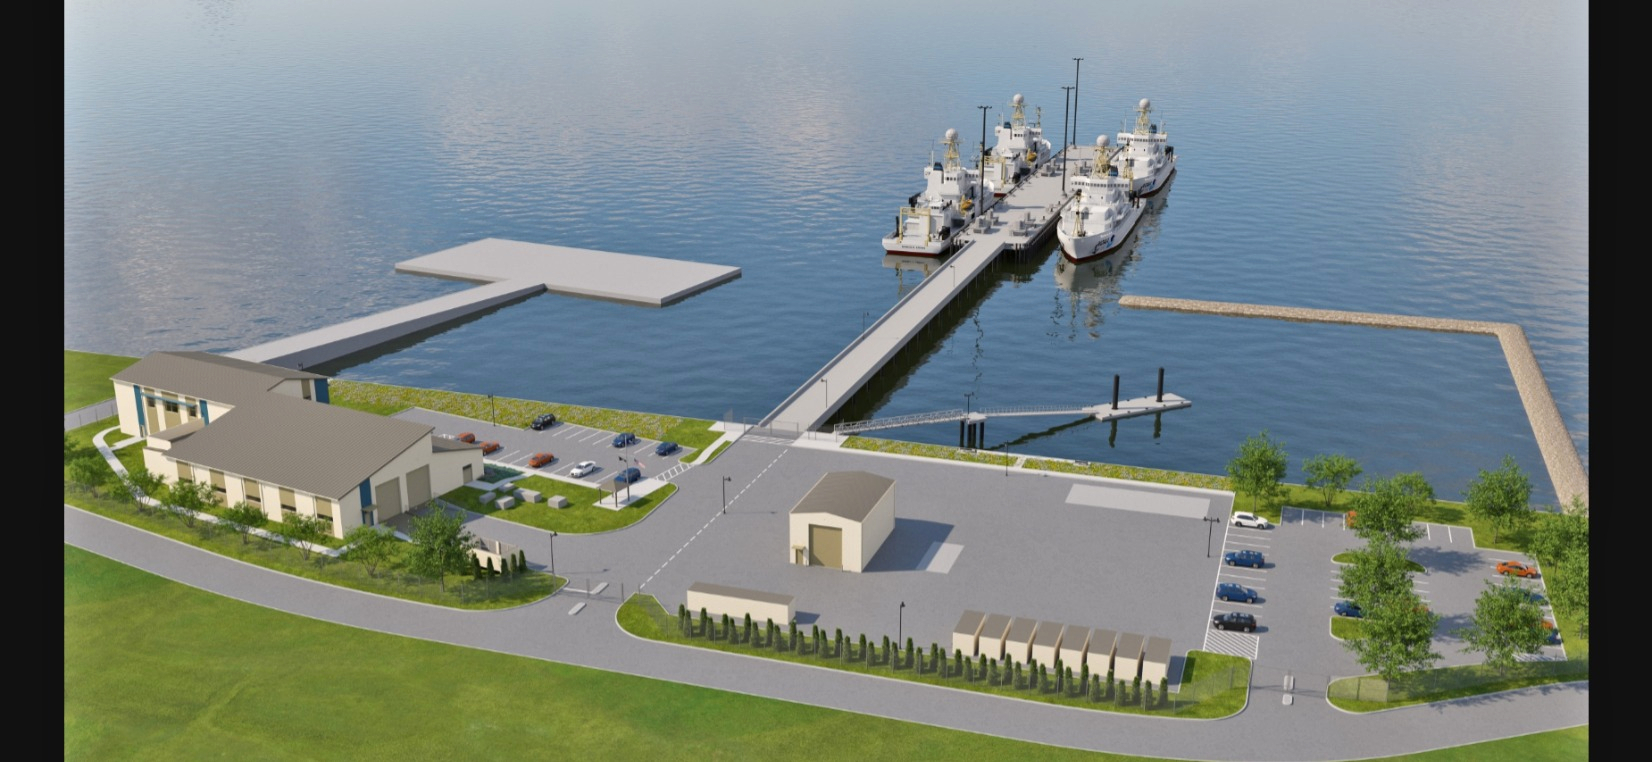 A rendering of the proposed NOAA Marine Operations Center at Naval Station Newport in Newport, RI